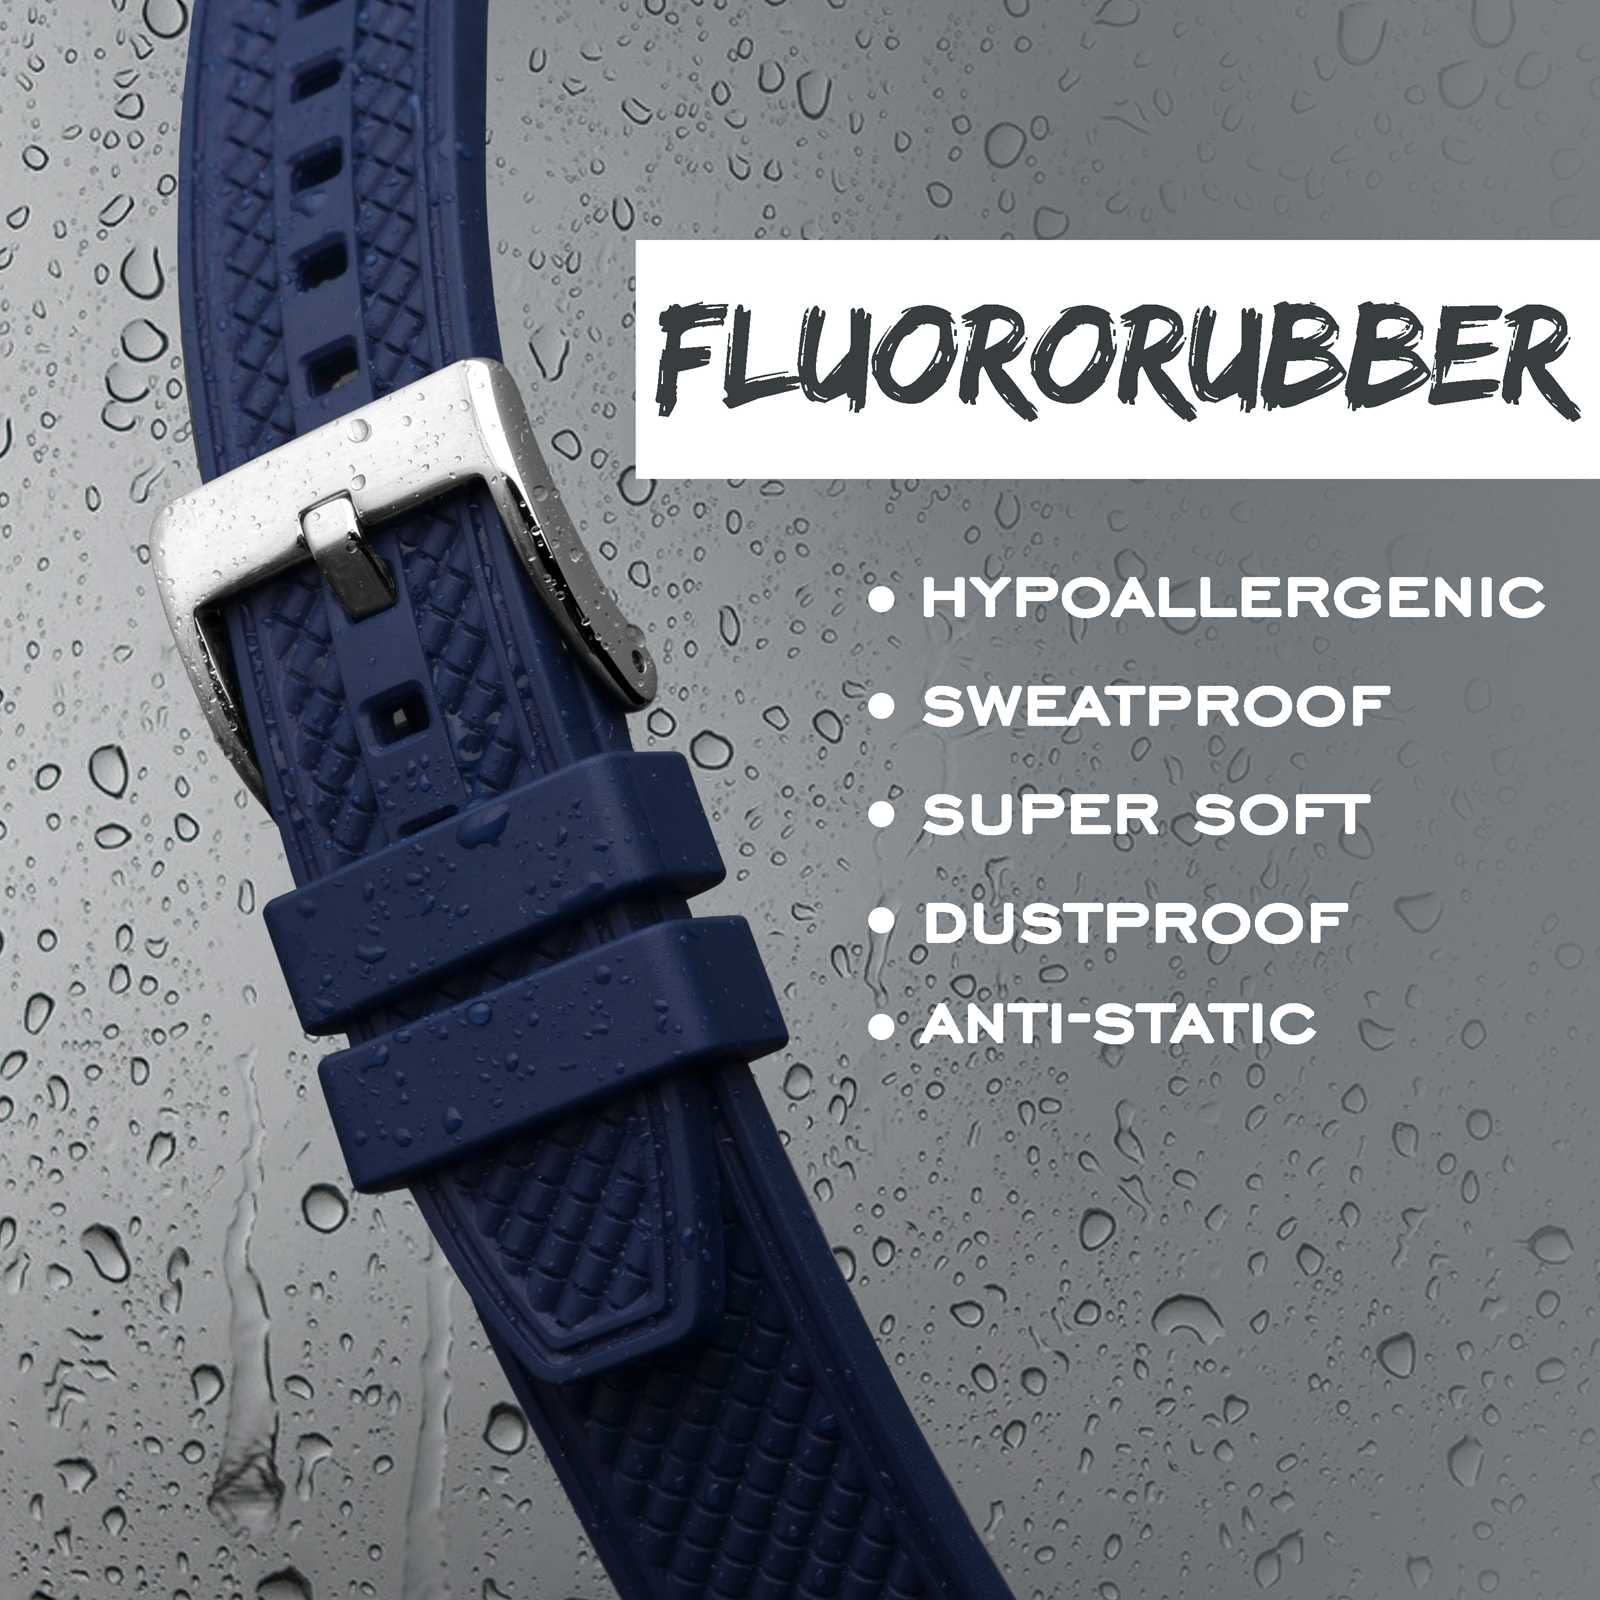 BISONSTRAP Watch Bands for Men, High Performance Fluororubber Watch Strap with Quick Release,18mm 20mm 22mm